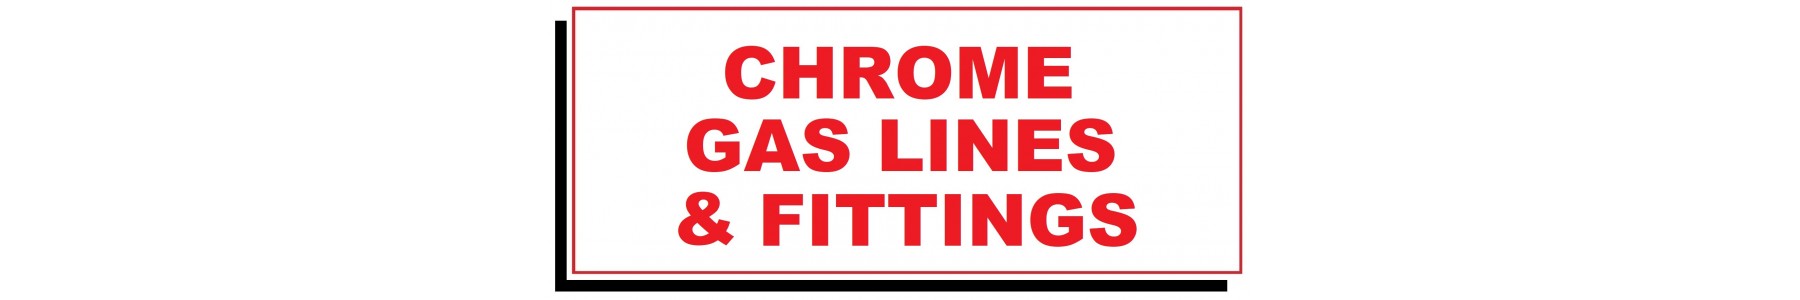 CHROME GAS LINES & FITTINGS